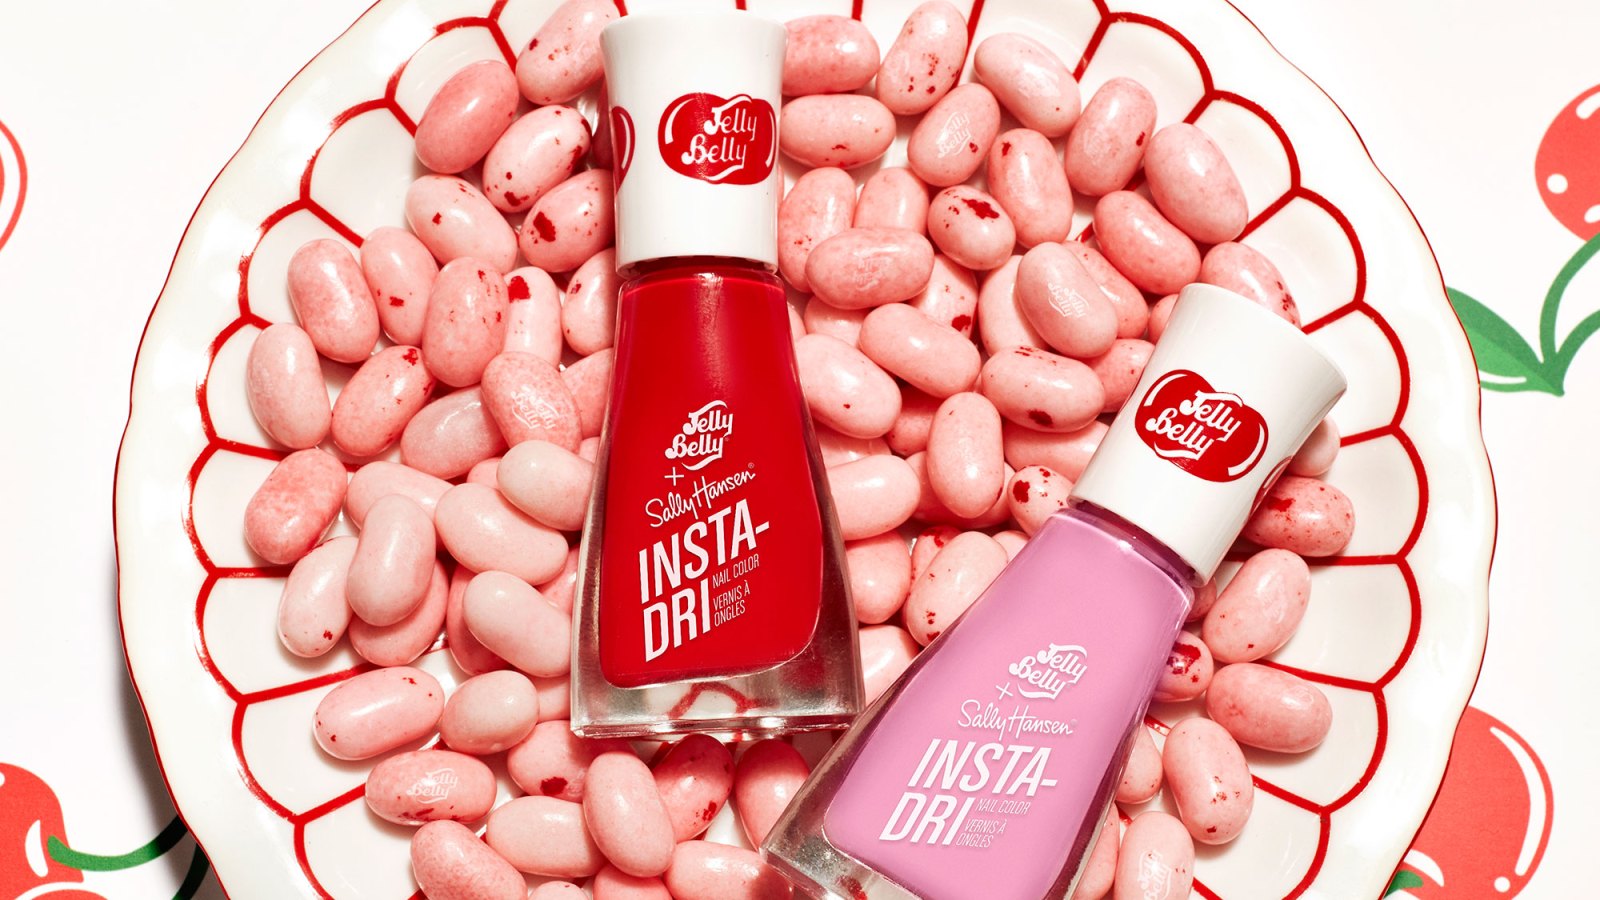 Sally Hansen Teams Up With Jelly Belly For the Sweetest Spring Nail Collection